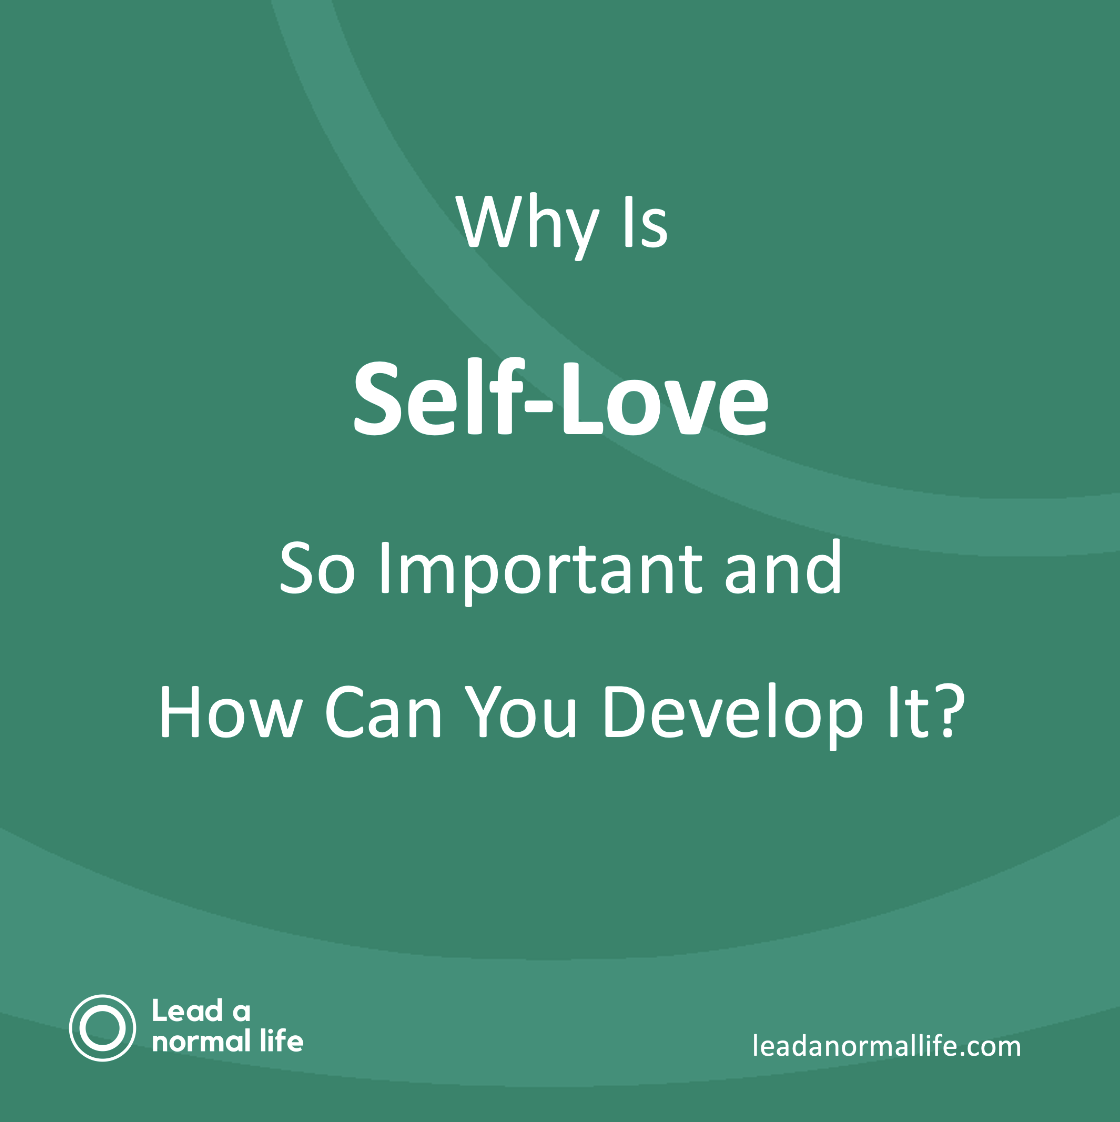 Why Is Self-Love So Important and How Can You Develop It? | Lead a Normal Life